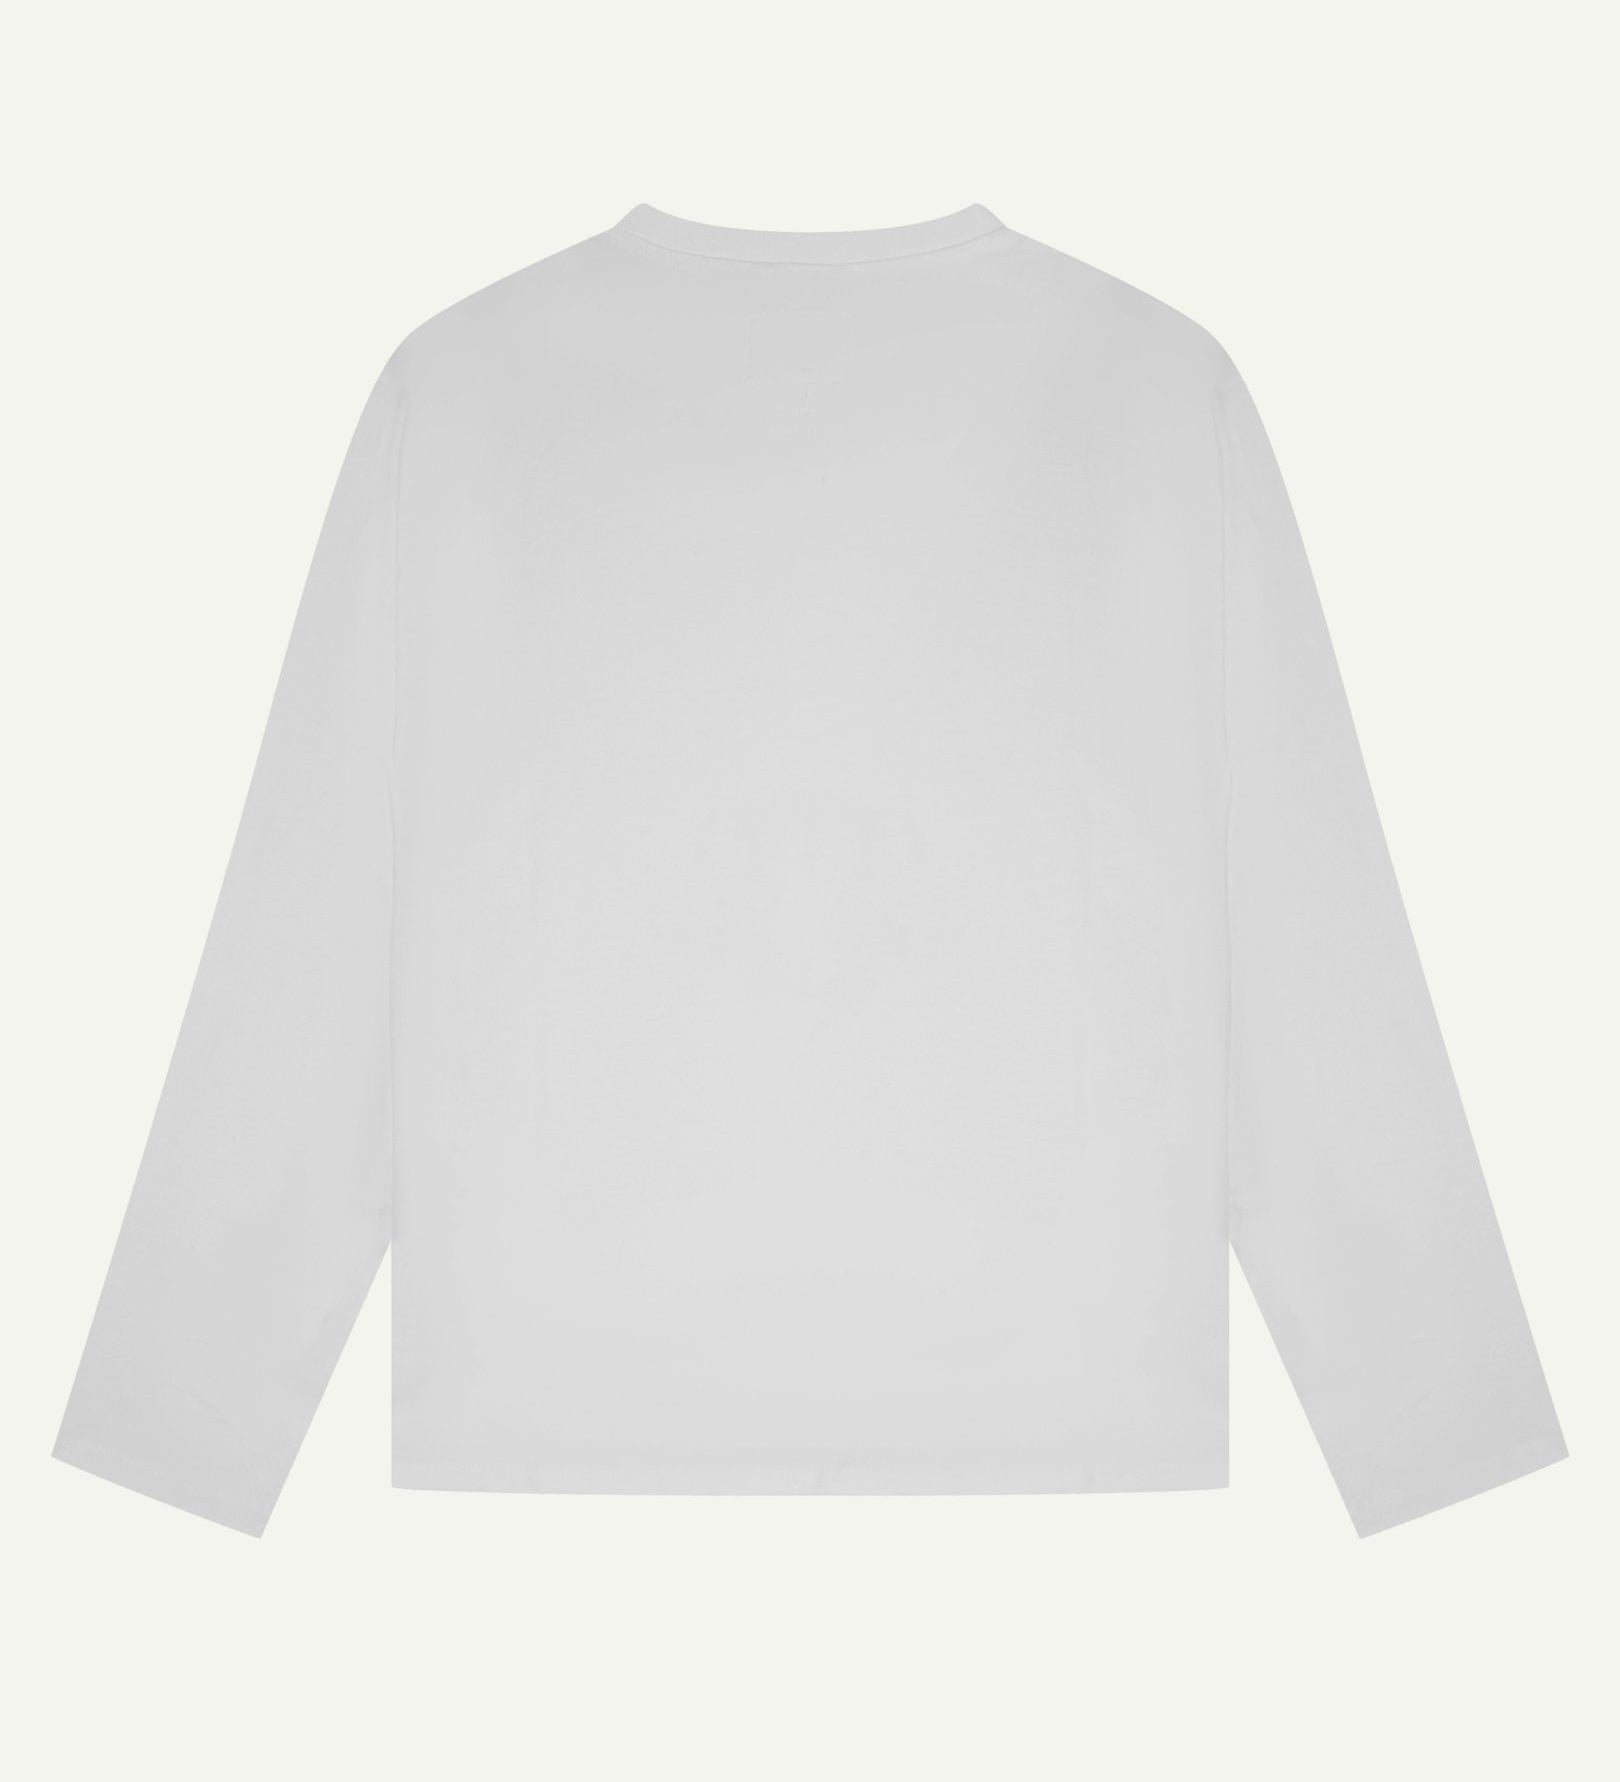 Back view of white organic cotton Uskees long-sleeved T-shirt.